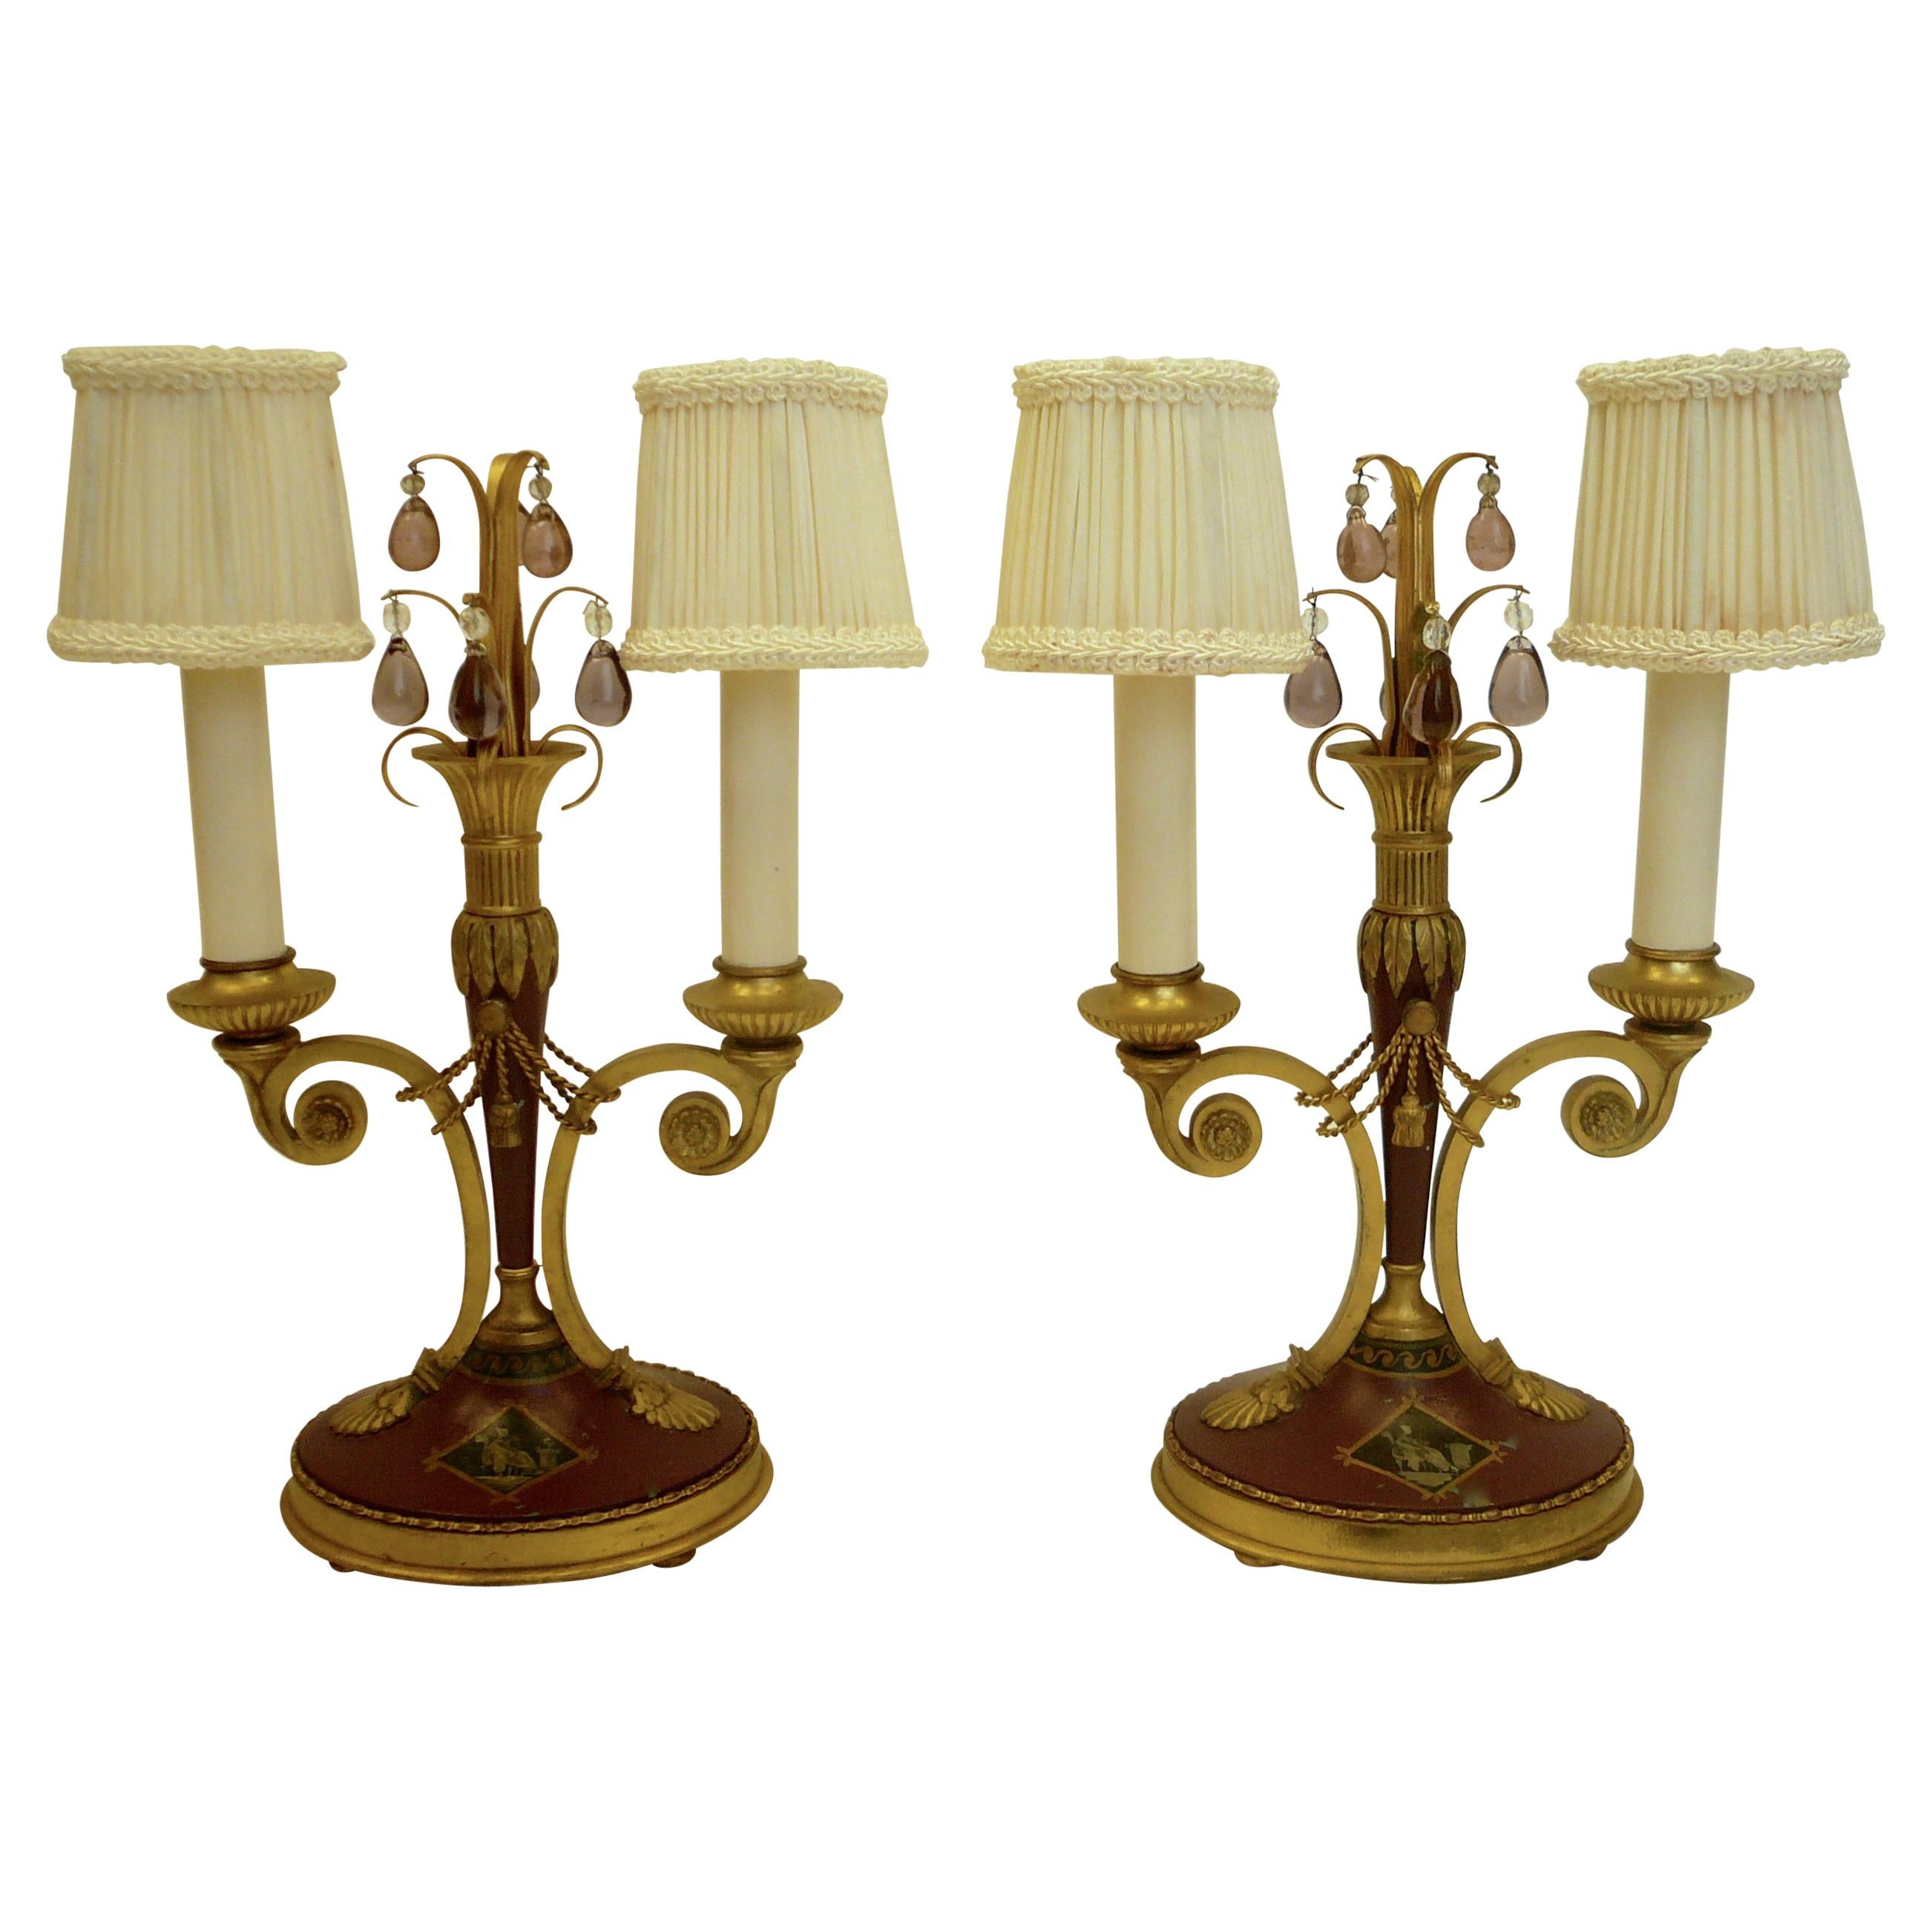 Pair of Directoire Style Gilt Bronze and Tole Painted Candelabra Lamps